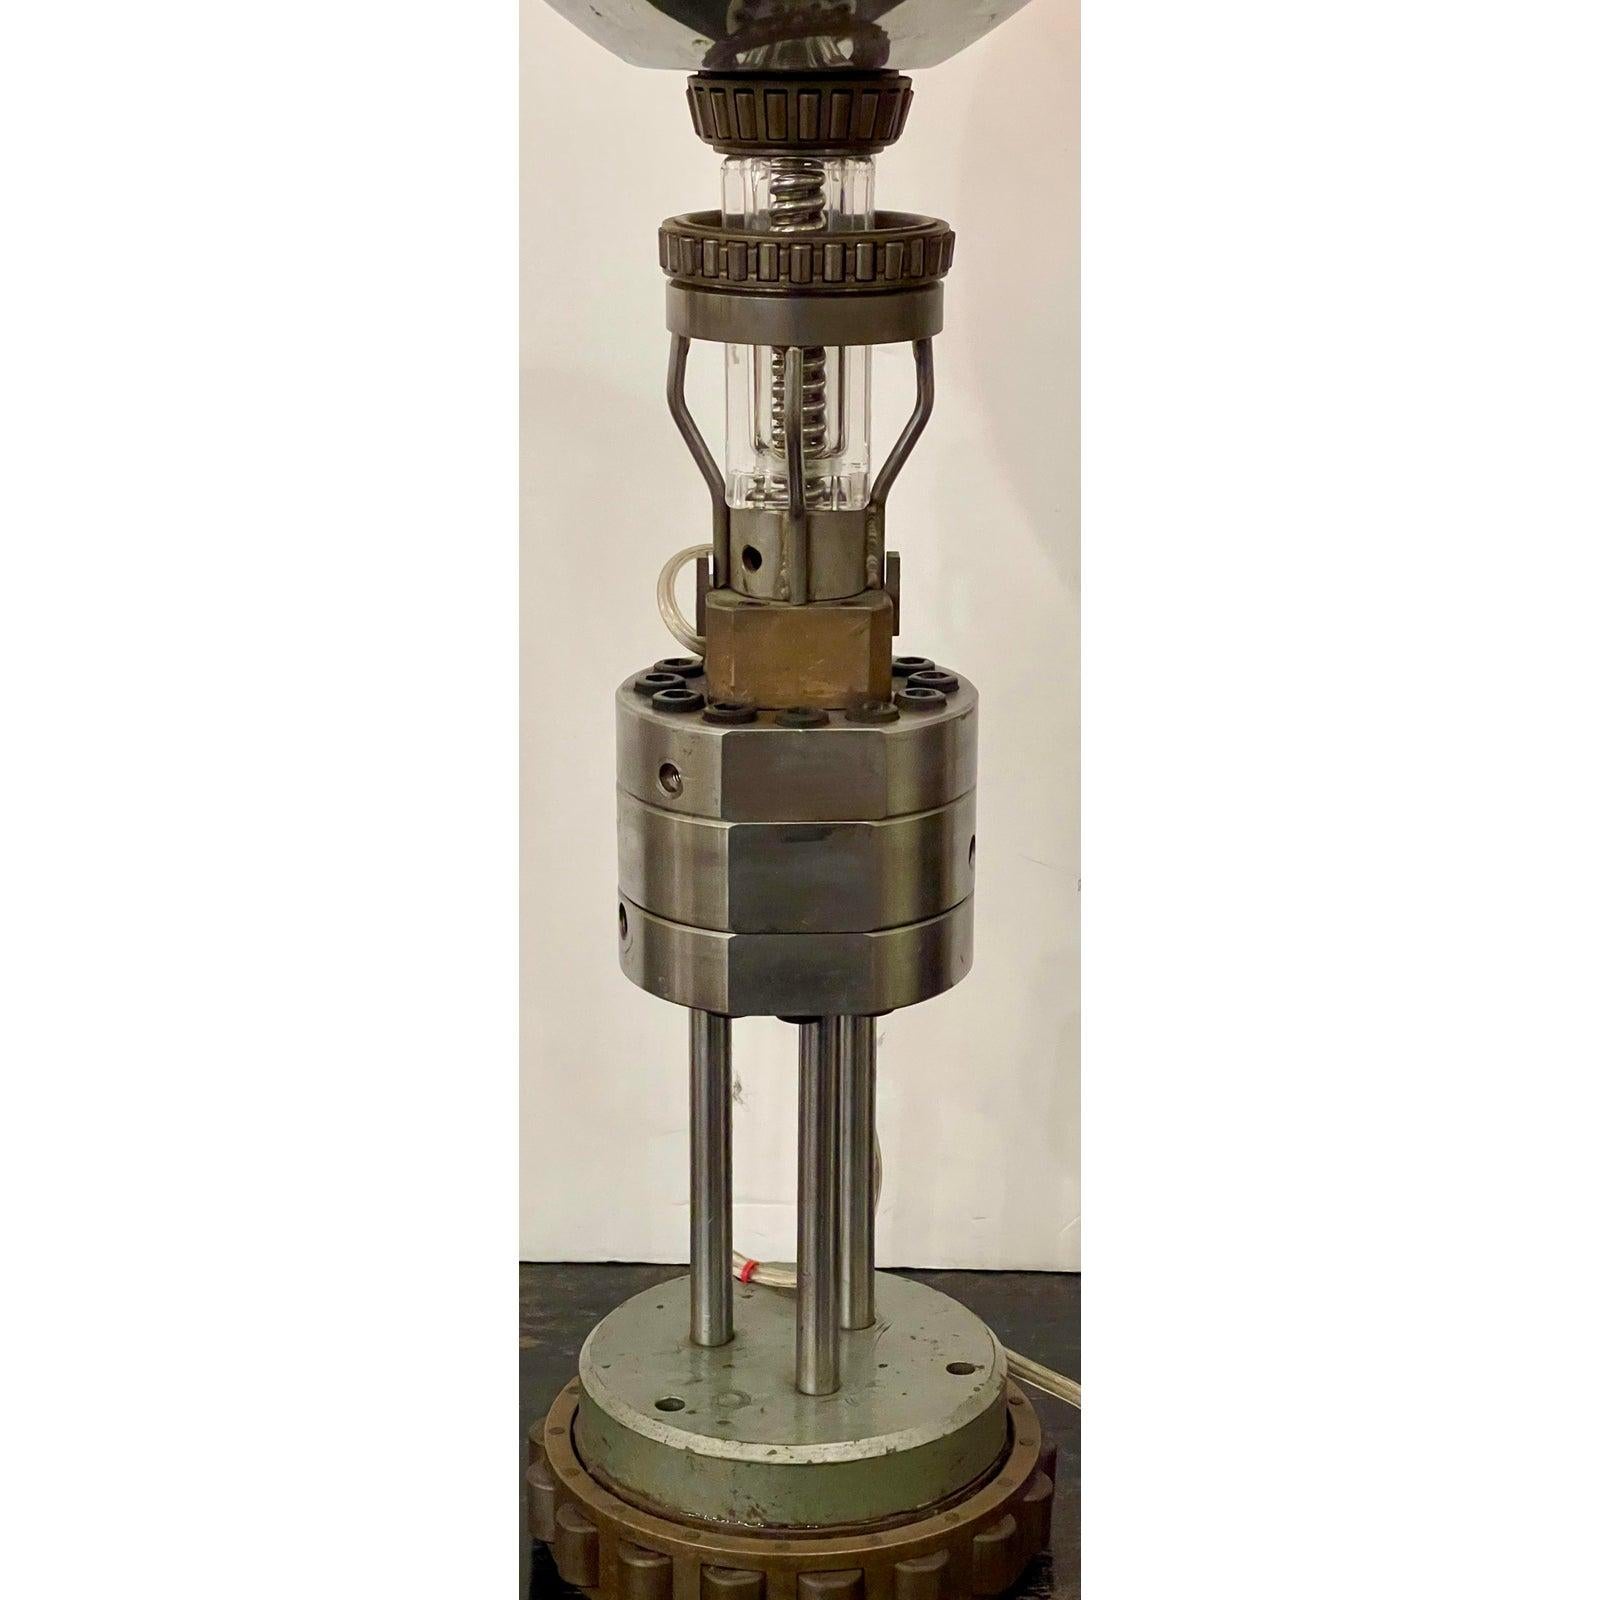 Art Deco machine age steampunk table lamp.

Additional information:
Materials: brass, bronze, lights, steel.
Color: silver.
Period: Early 20th century.
Styles: Art Deco, Mid-Century Modern.
Lamp Shade: included. 
Power Sources: Up to 120V